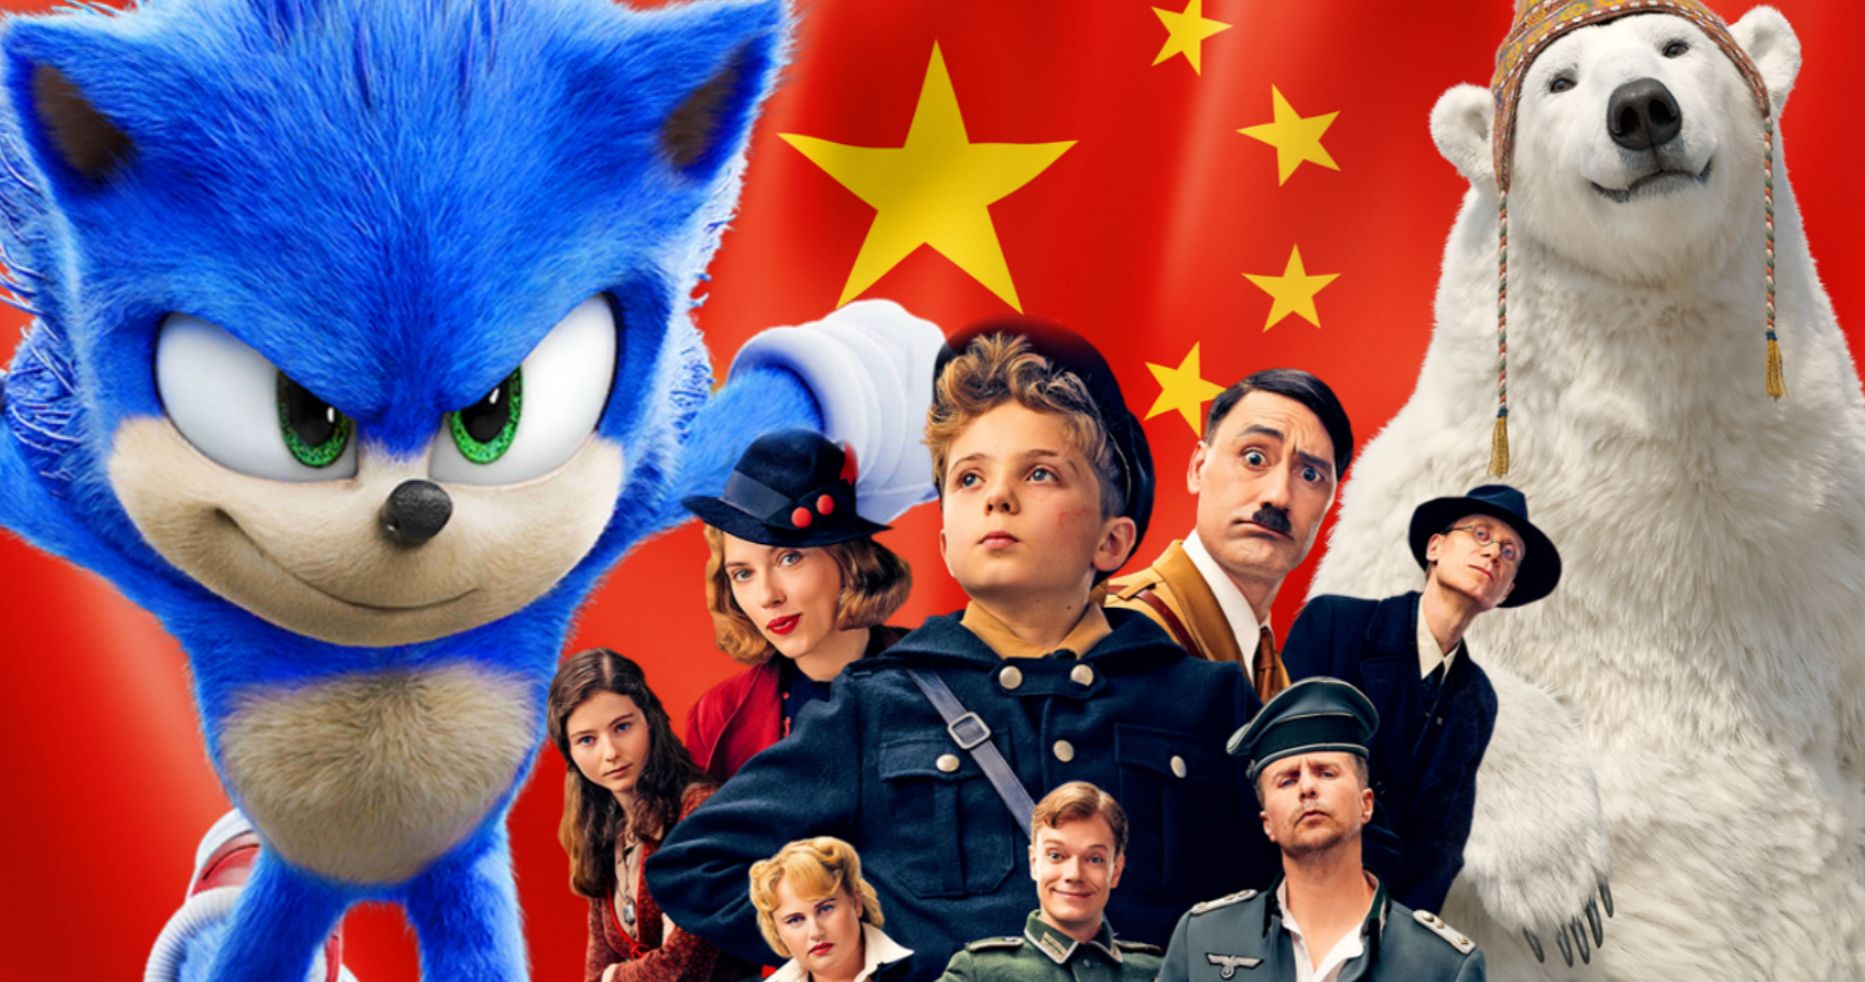 Chinese Box Office Loses $214M and Counting as Coronavirus Crisis Continues